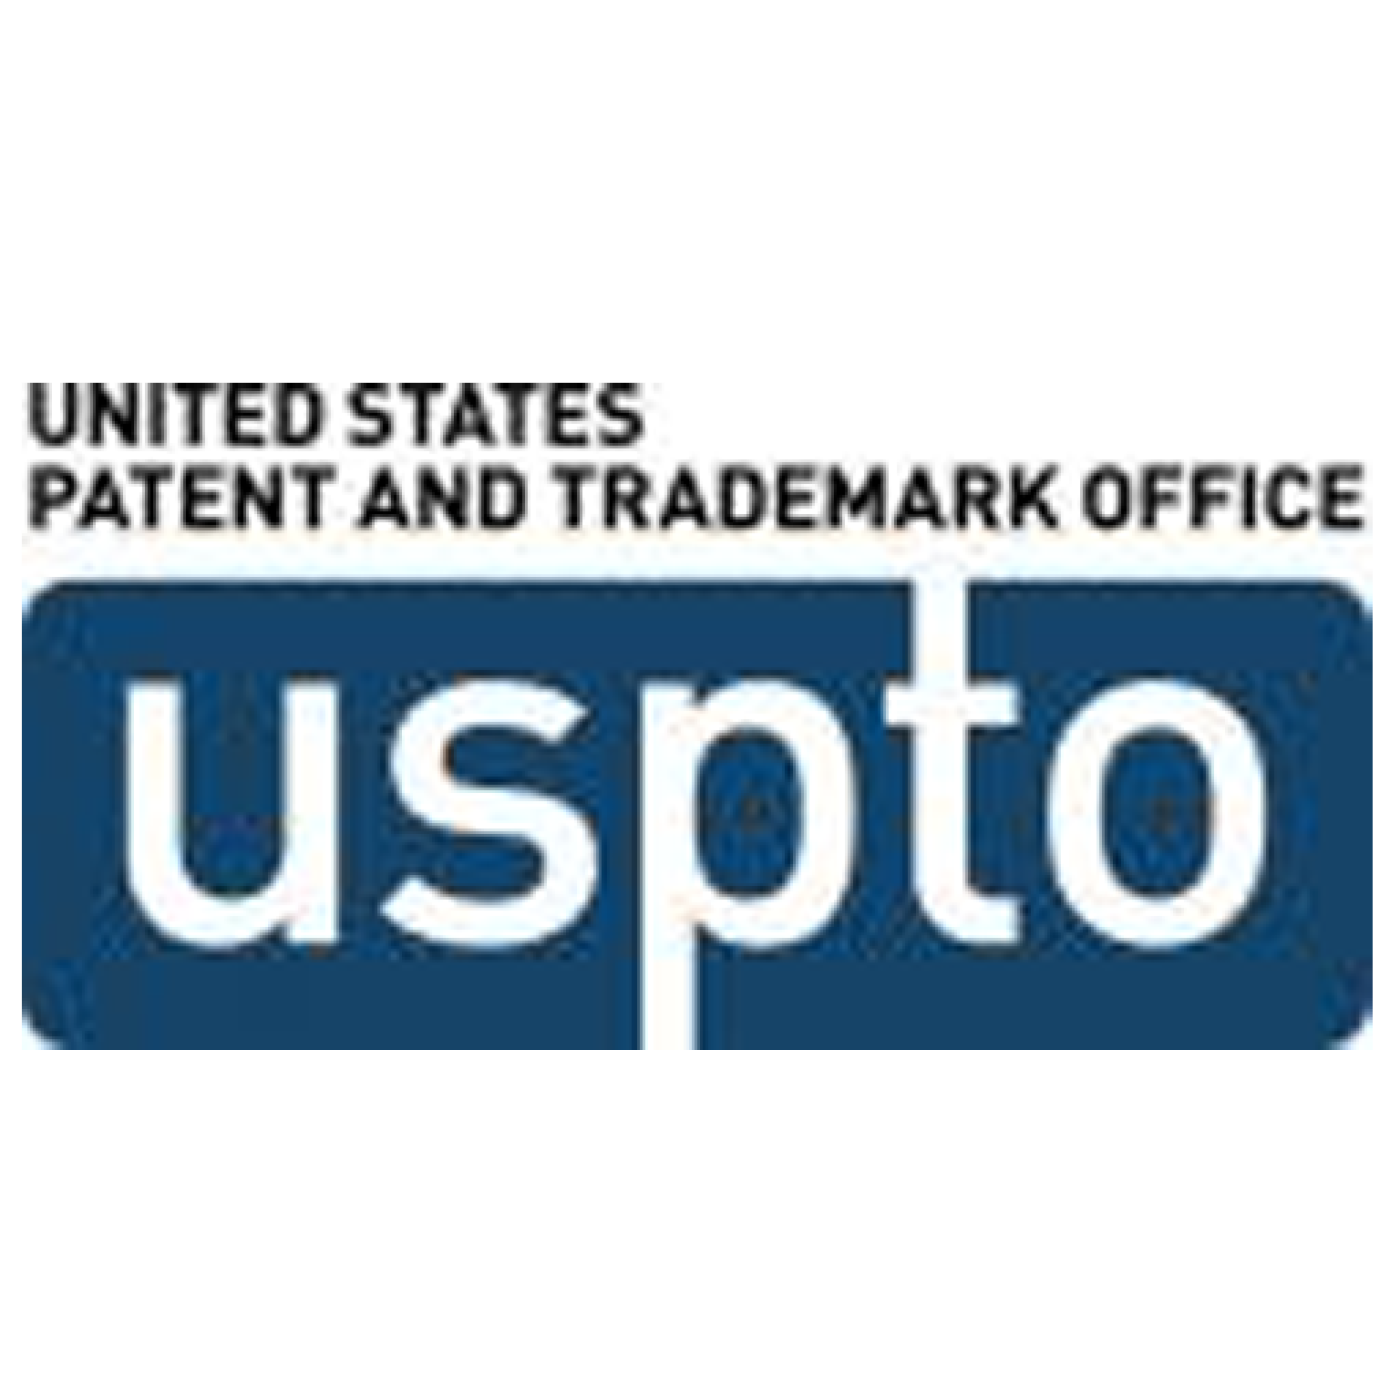 U.S. Patent and Trademark Office, U.S. Department of Commerce